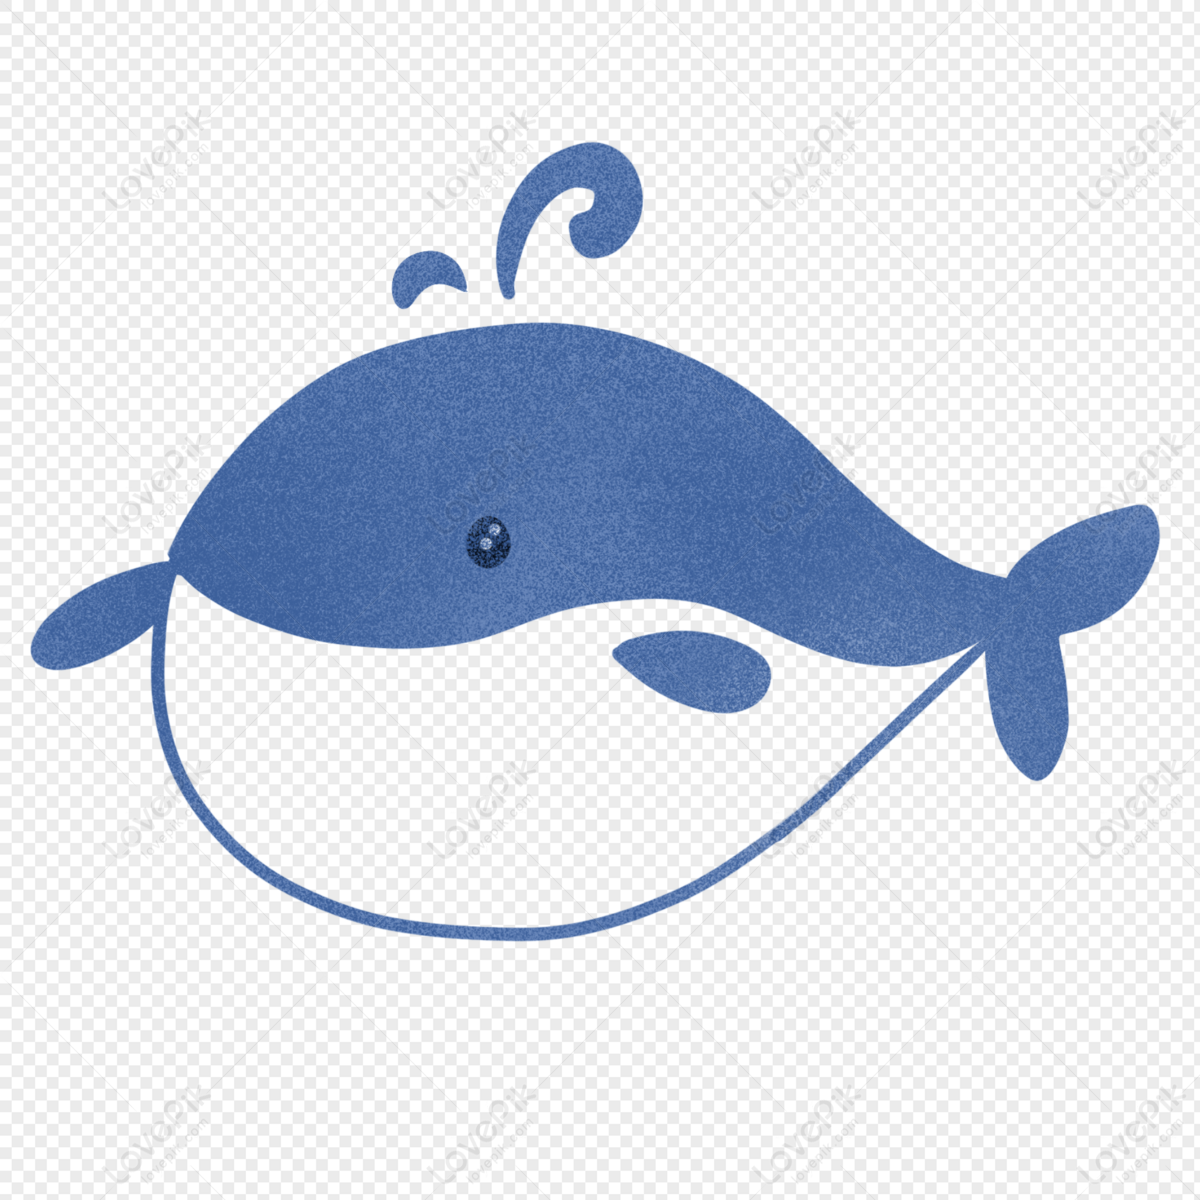 FREE! - Beluga Whale Page Border, Page Borders